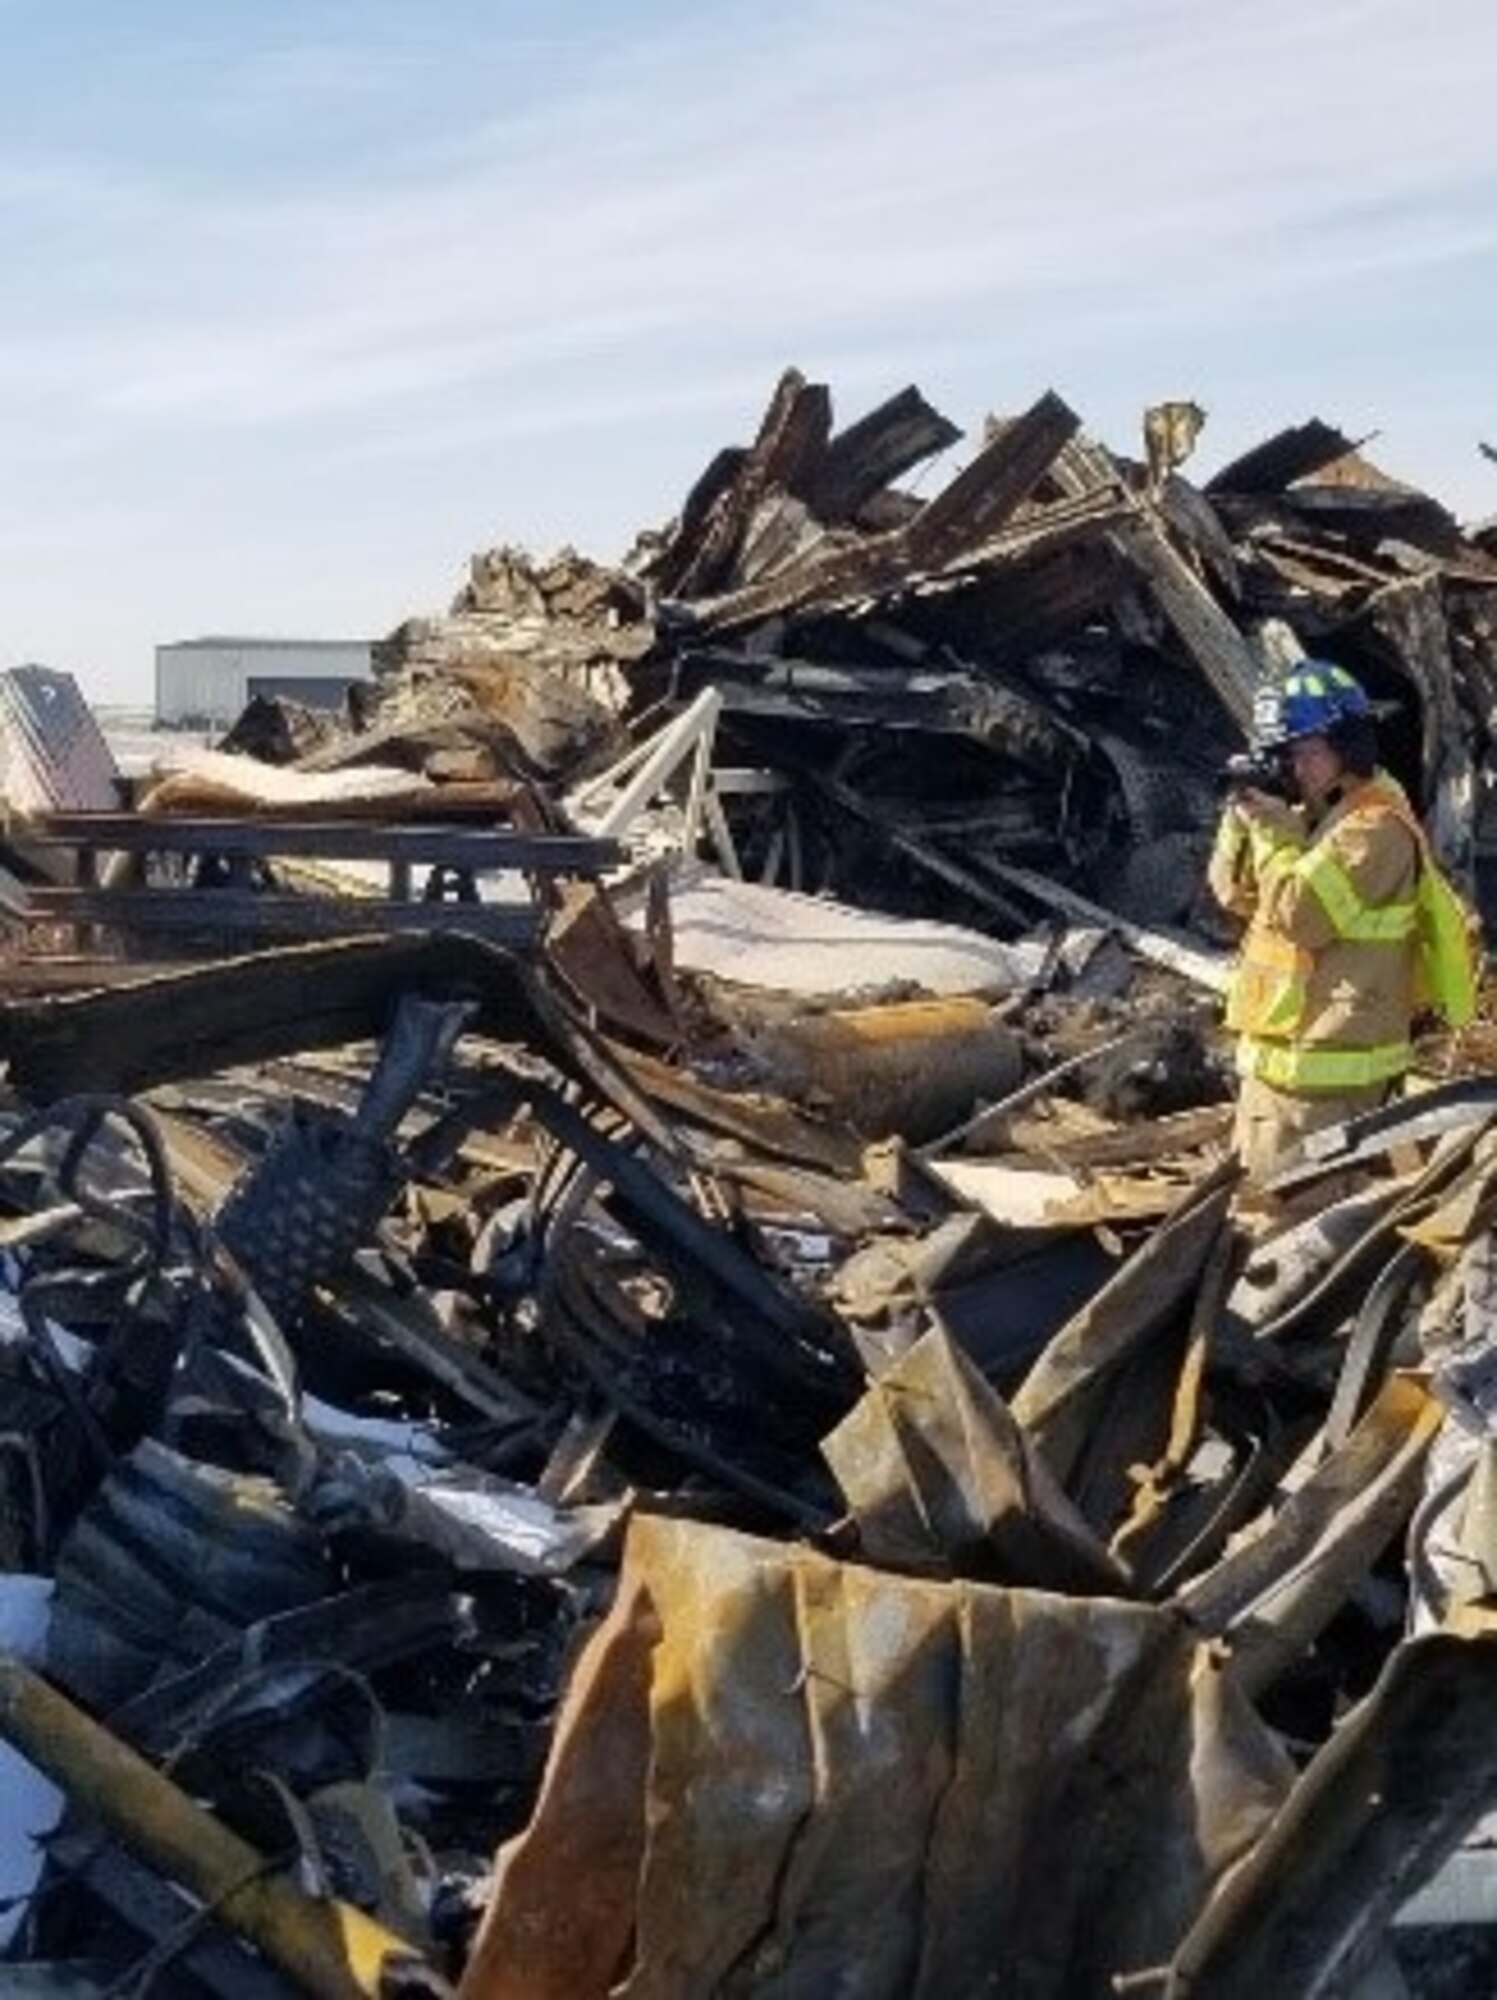 On Dec. 28, 2019, a fire gutted a Strategic Air Command-era hangar on Miniot Air Force Base, N.D. Office of Special Investigations Detachment 813 and 2nd Field Investigations Squadron teamed with the Bureau of Alcohol, Tobacco, Firearms and Explosives to conduct the subsequent investigation. Here, Special Agent Andrew Weinzierl photographs scene conditions to help determine the origin and cause of the blaze resulting in a $7M loss to the Air Force. (Photo by Investigator Jesse Gomez, OSI Det. 813)